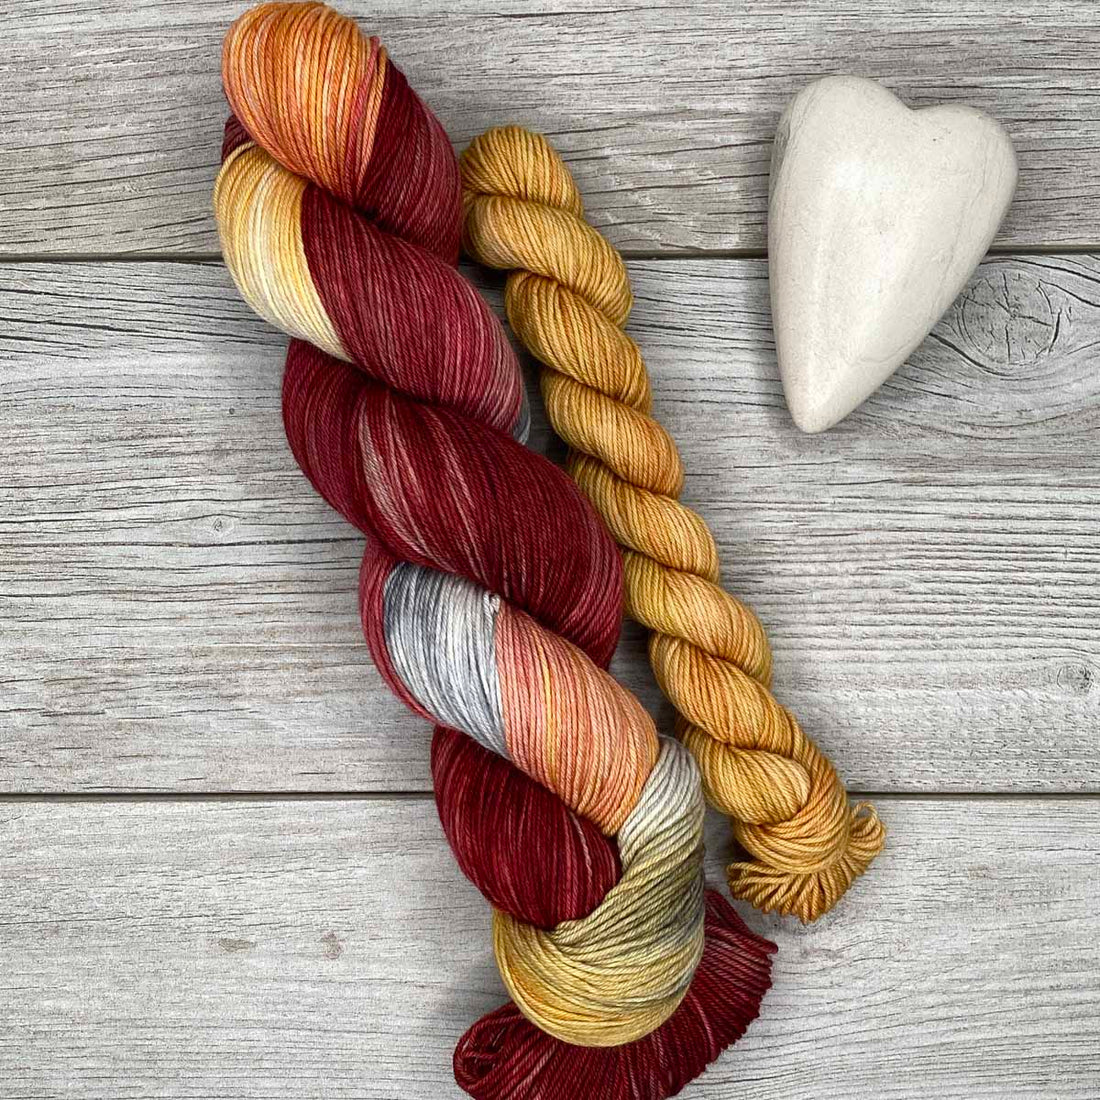 King Peter the Magnificent SOCK SET  |  Narnia Inspired  |  SHEEPISHsock  |  fingering weight